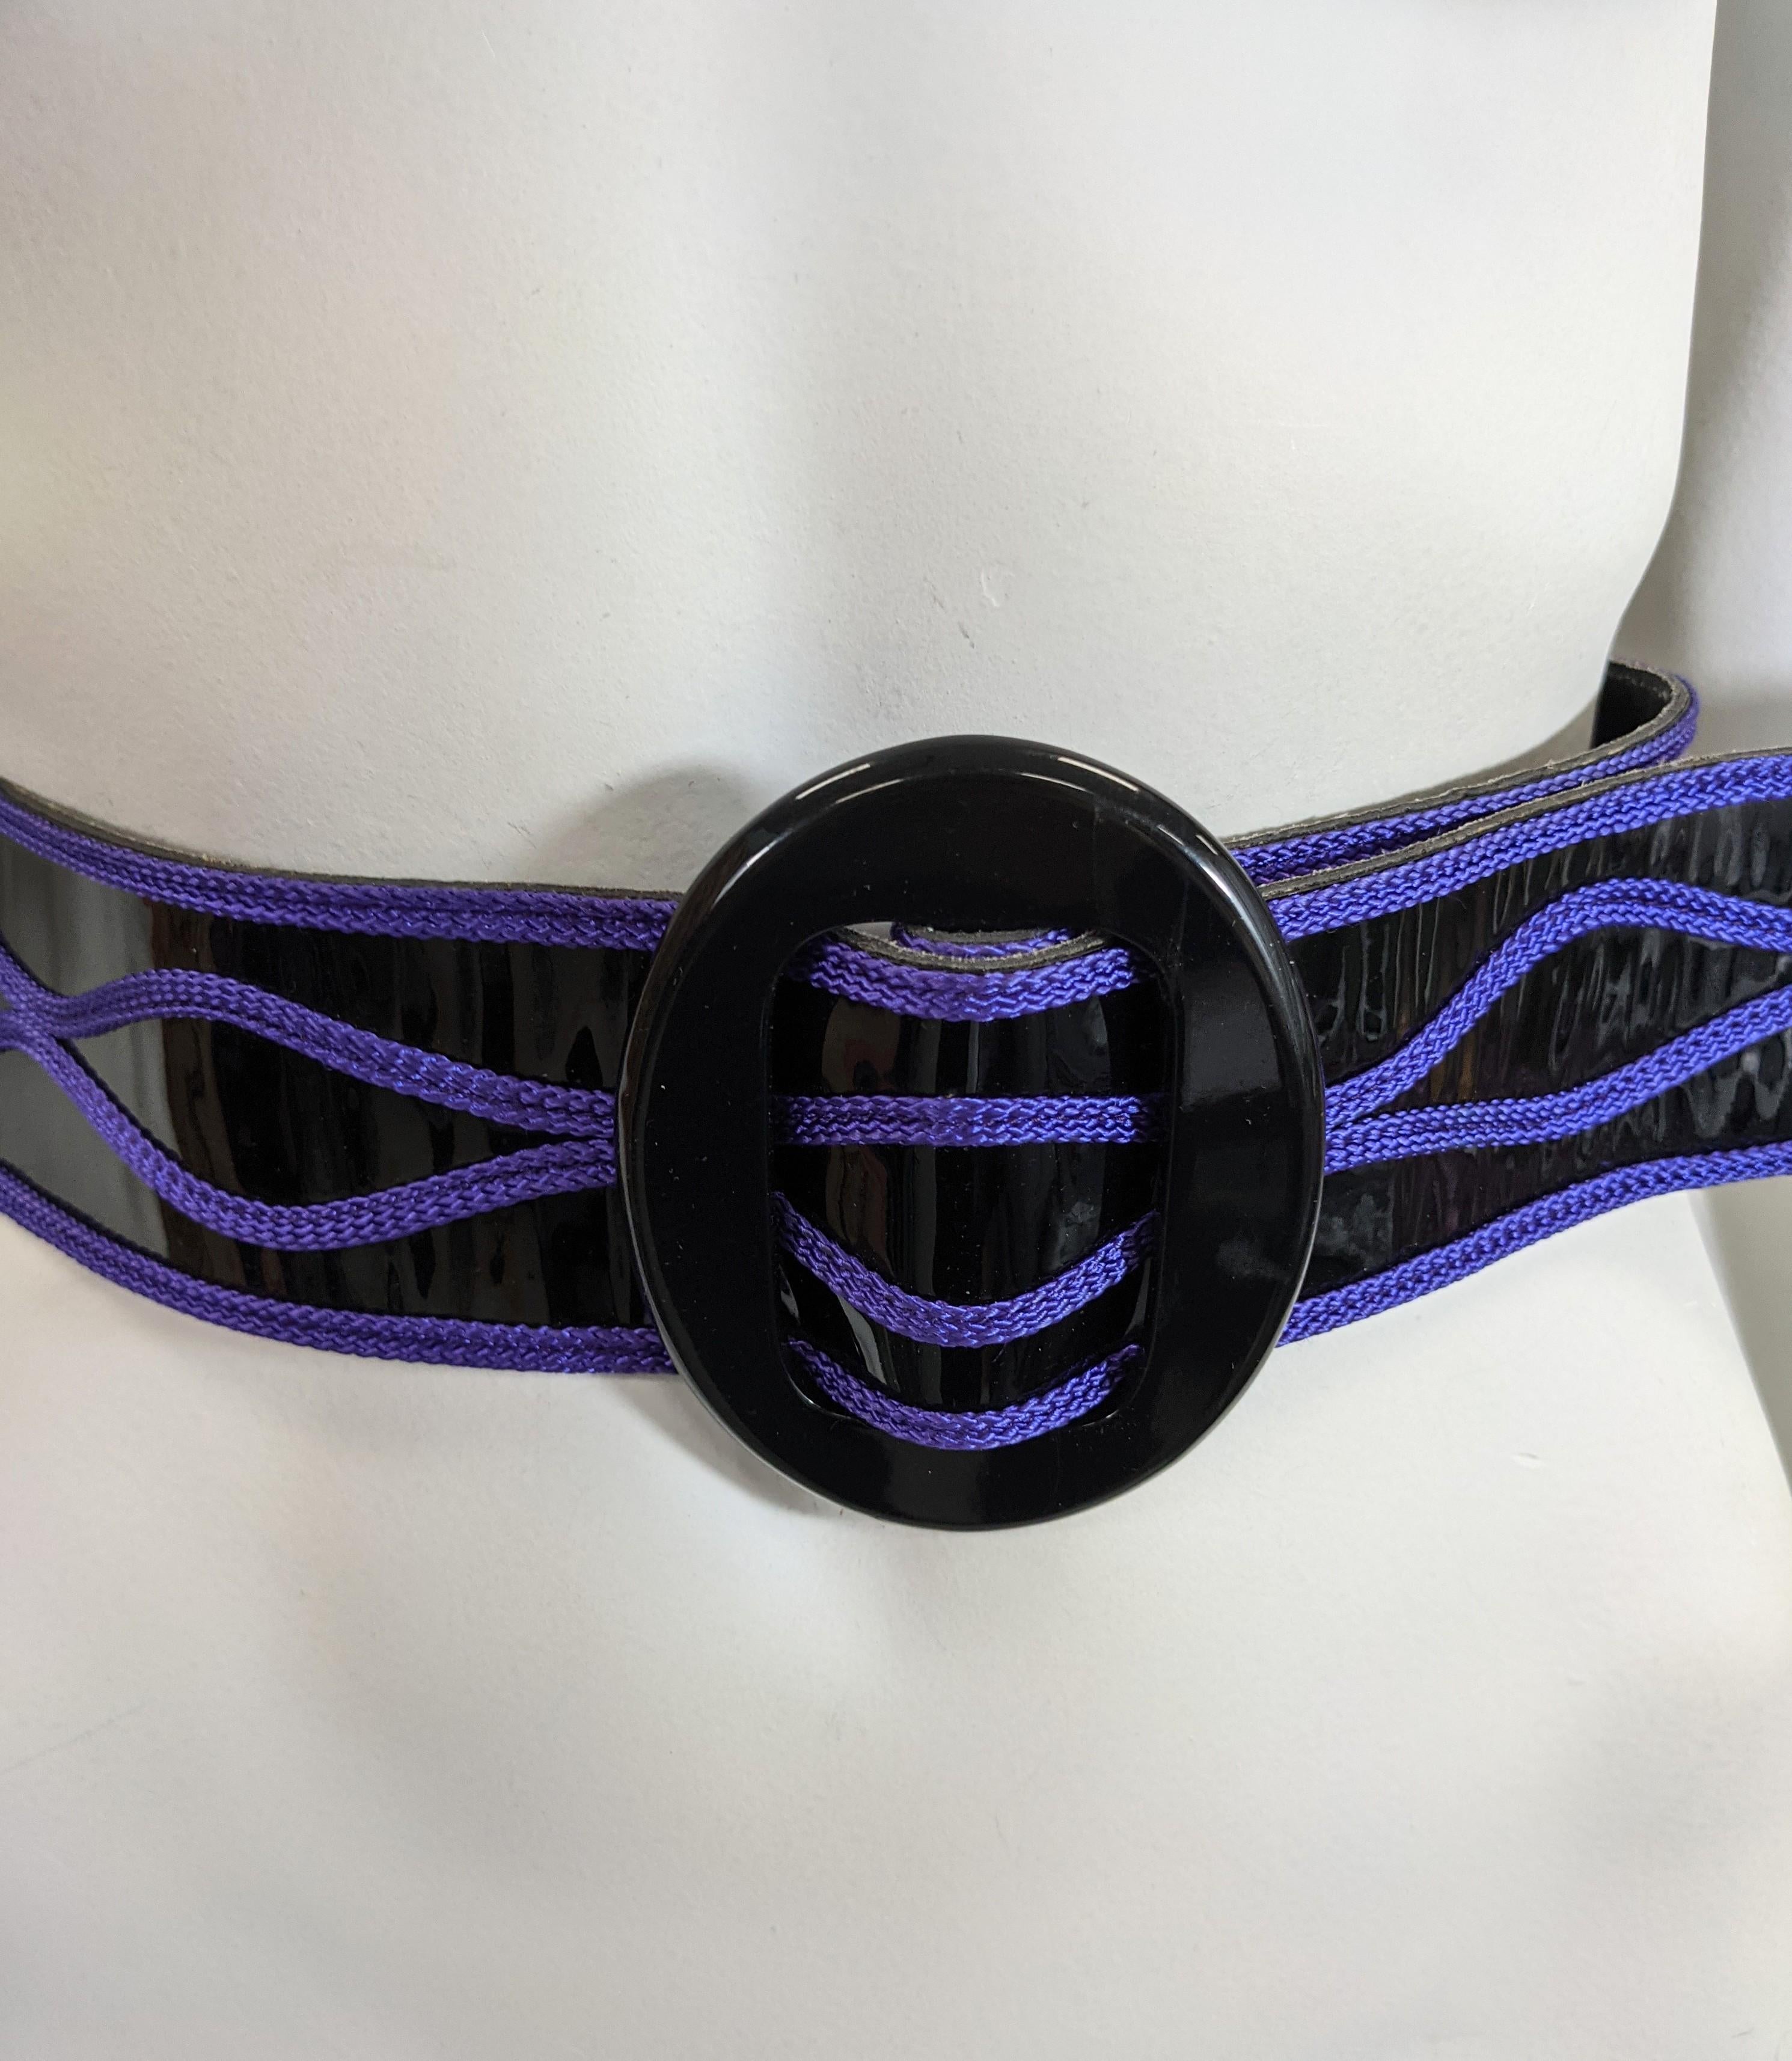 Givenchy Patent and Soutache Belt In Excellent Condition For Sale In New York, NY